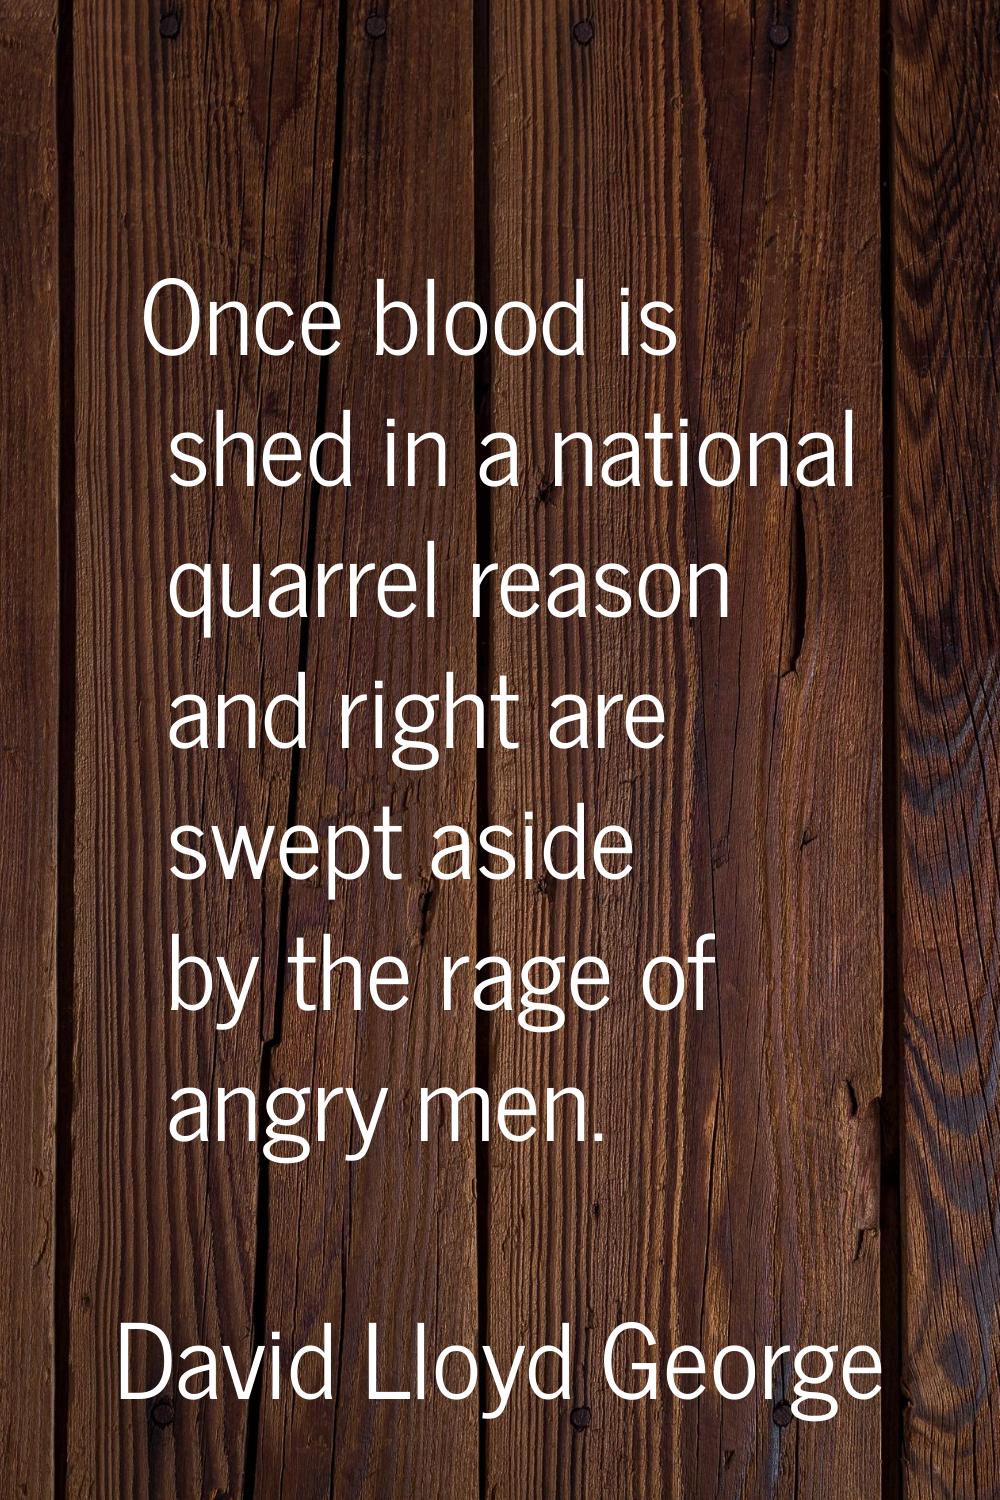 Once blood is shed in a national quarrel reason and right are swept aside by the rage of angry men.